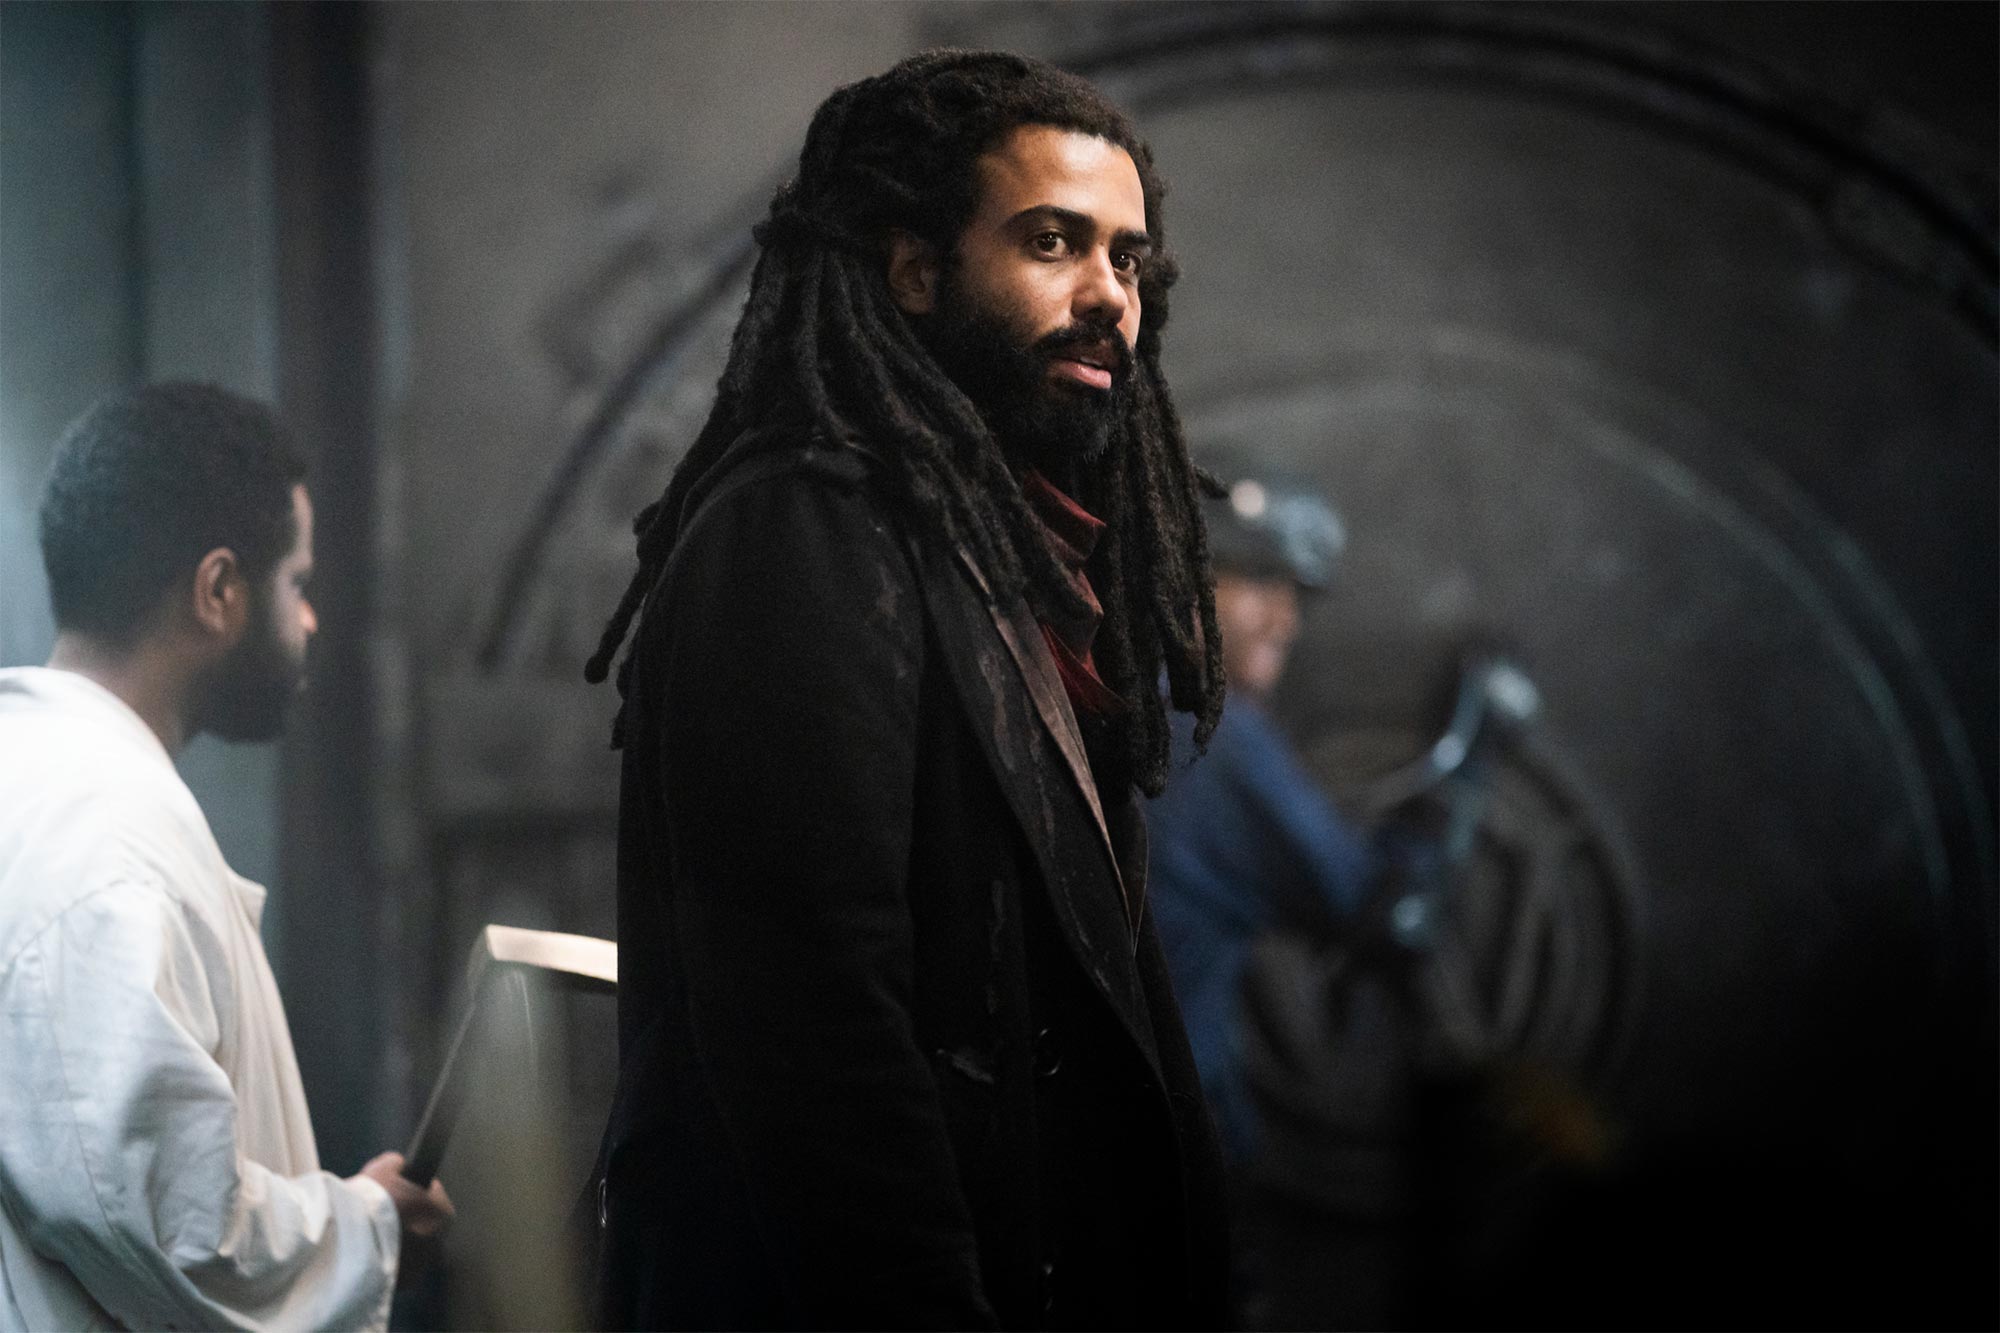 What to Watch on Monday: It's the end of the line for Snowpiercer season 2